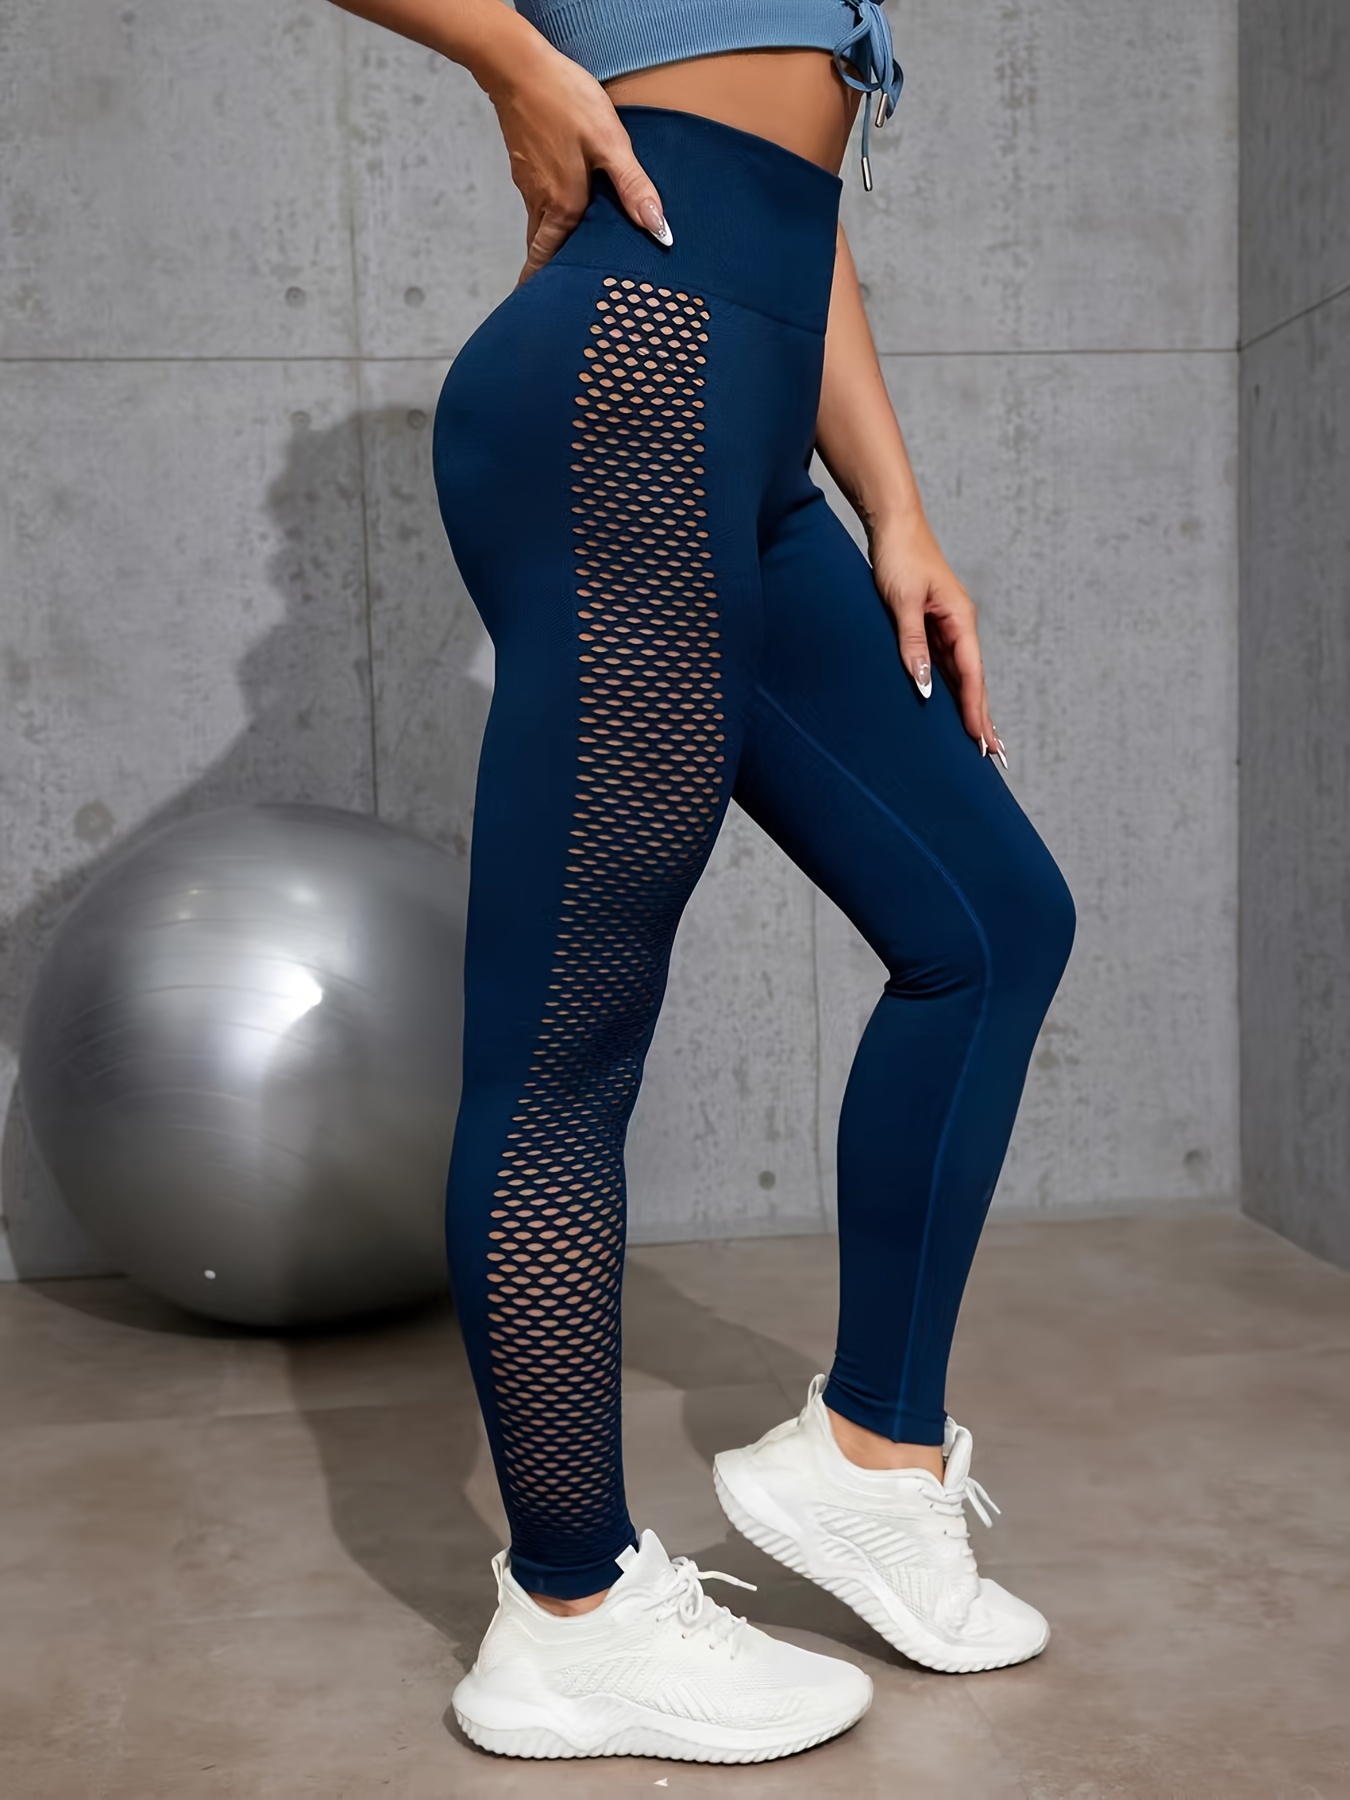 2016 Hot New Matte stretch Yoga pants calzas mallas mujer